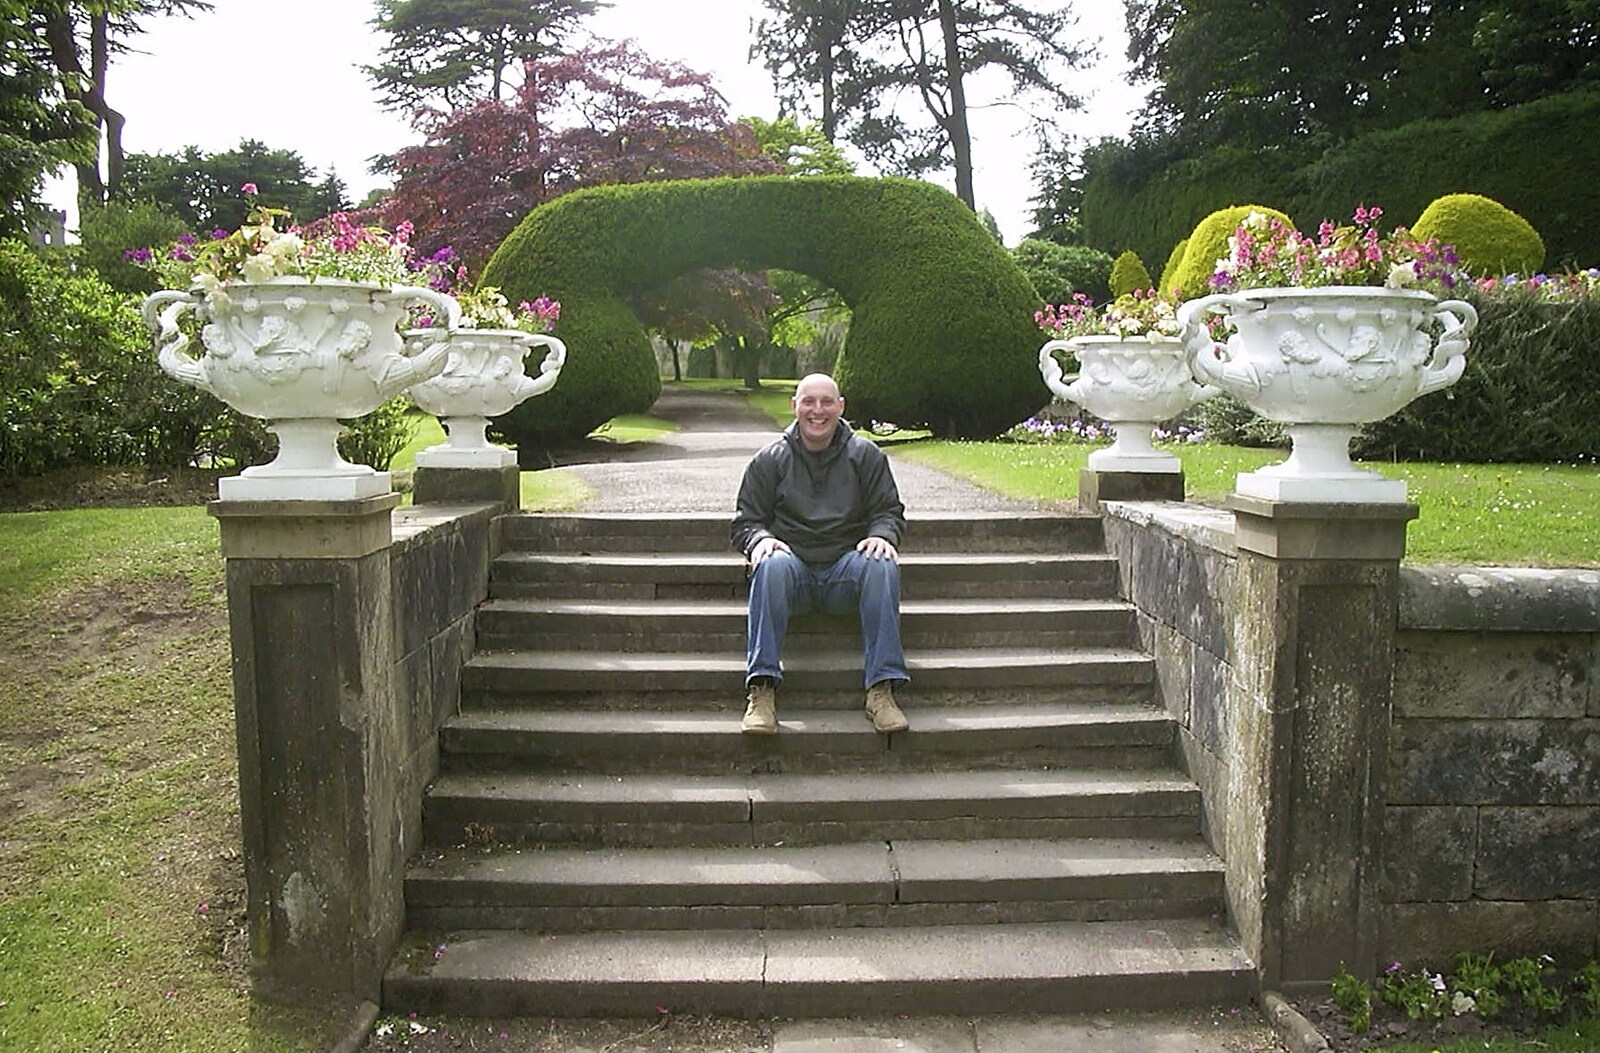 Gov sits on some steps from A Trip to Alton Towers, Staffordshire - 19th June 2004